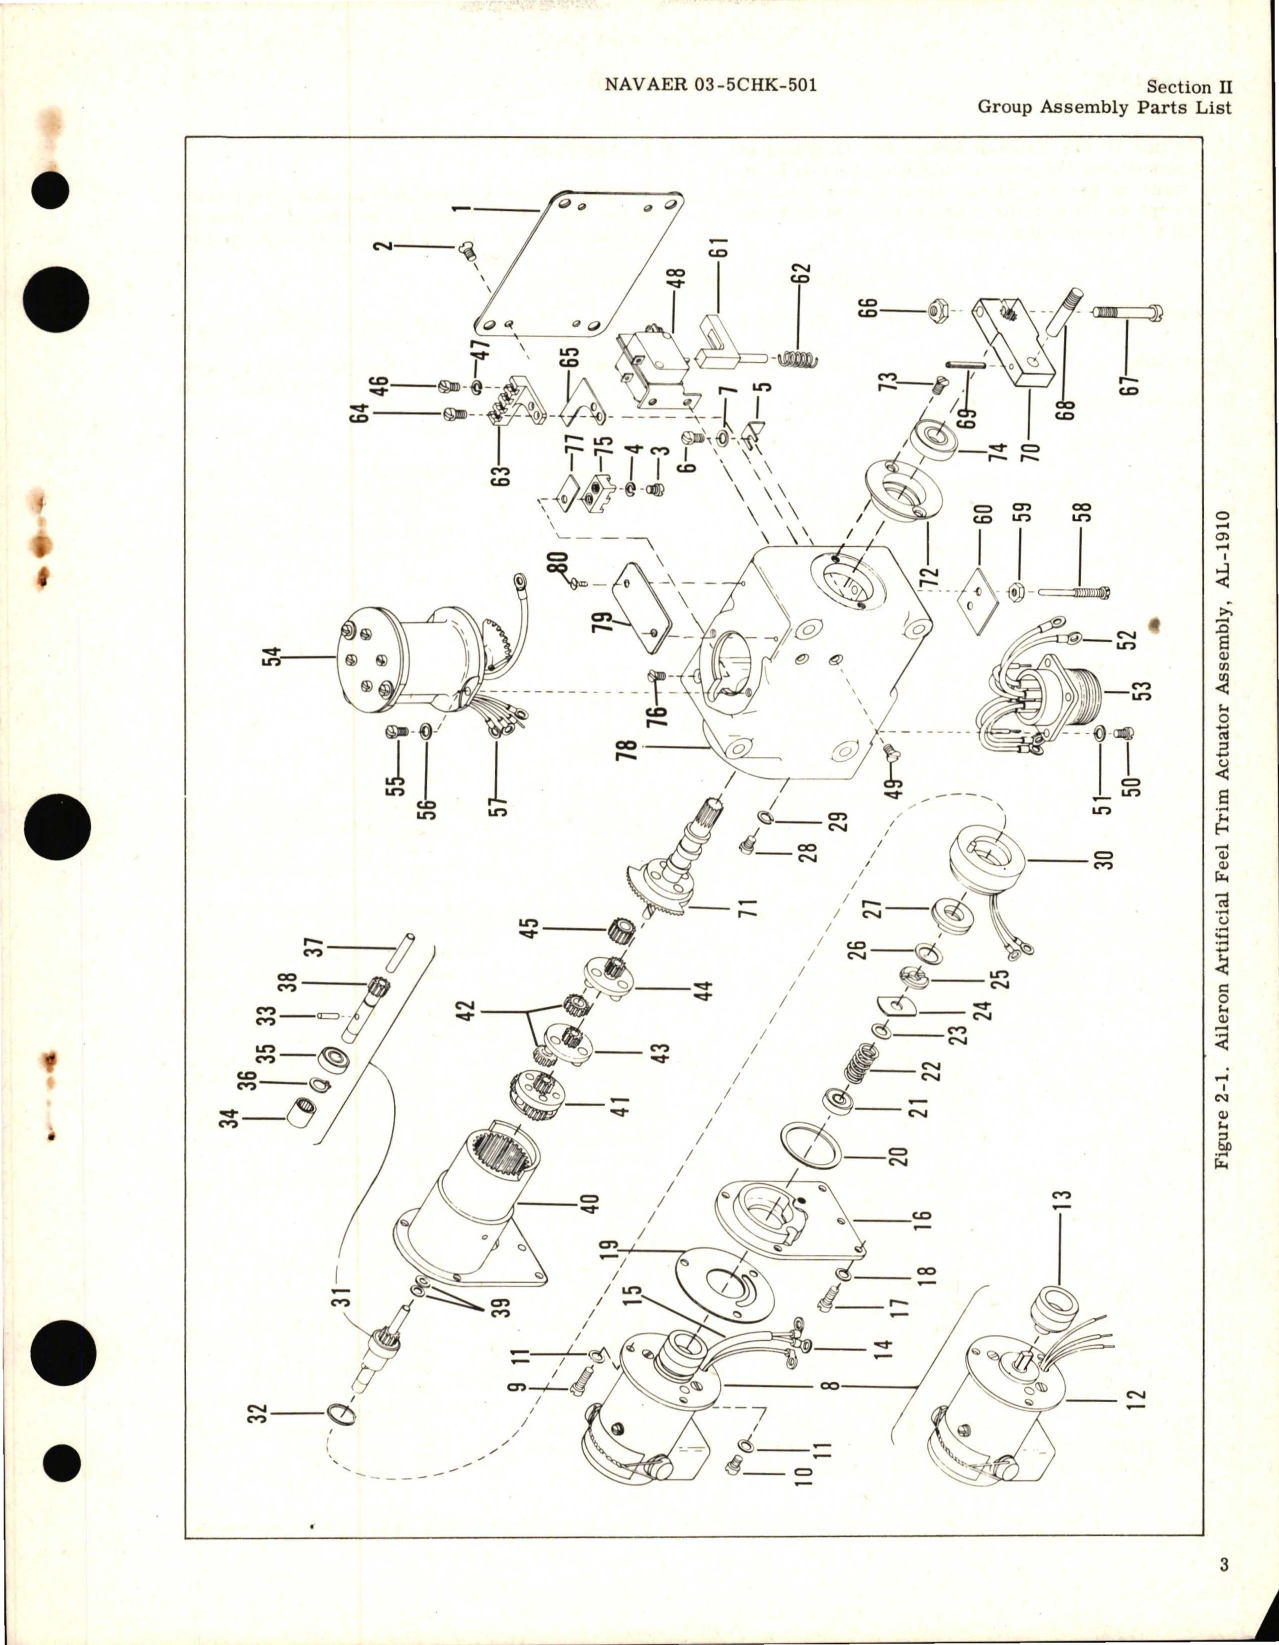 Sample page 5 from AirCorps Library document: Overhaul Instructions for Actuator Assembly, Aileron Artificial Feel Trim Part Numbers AL-1910 and AL-1423-1